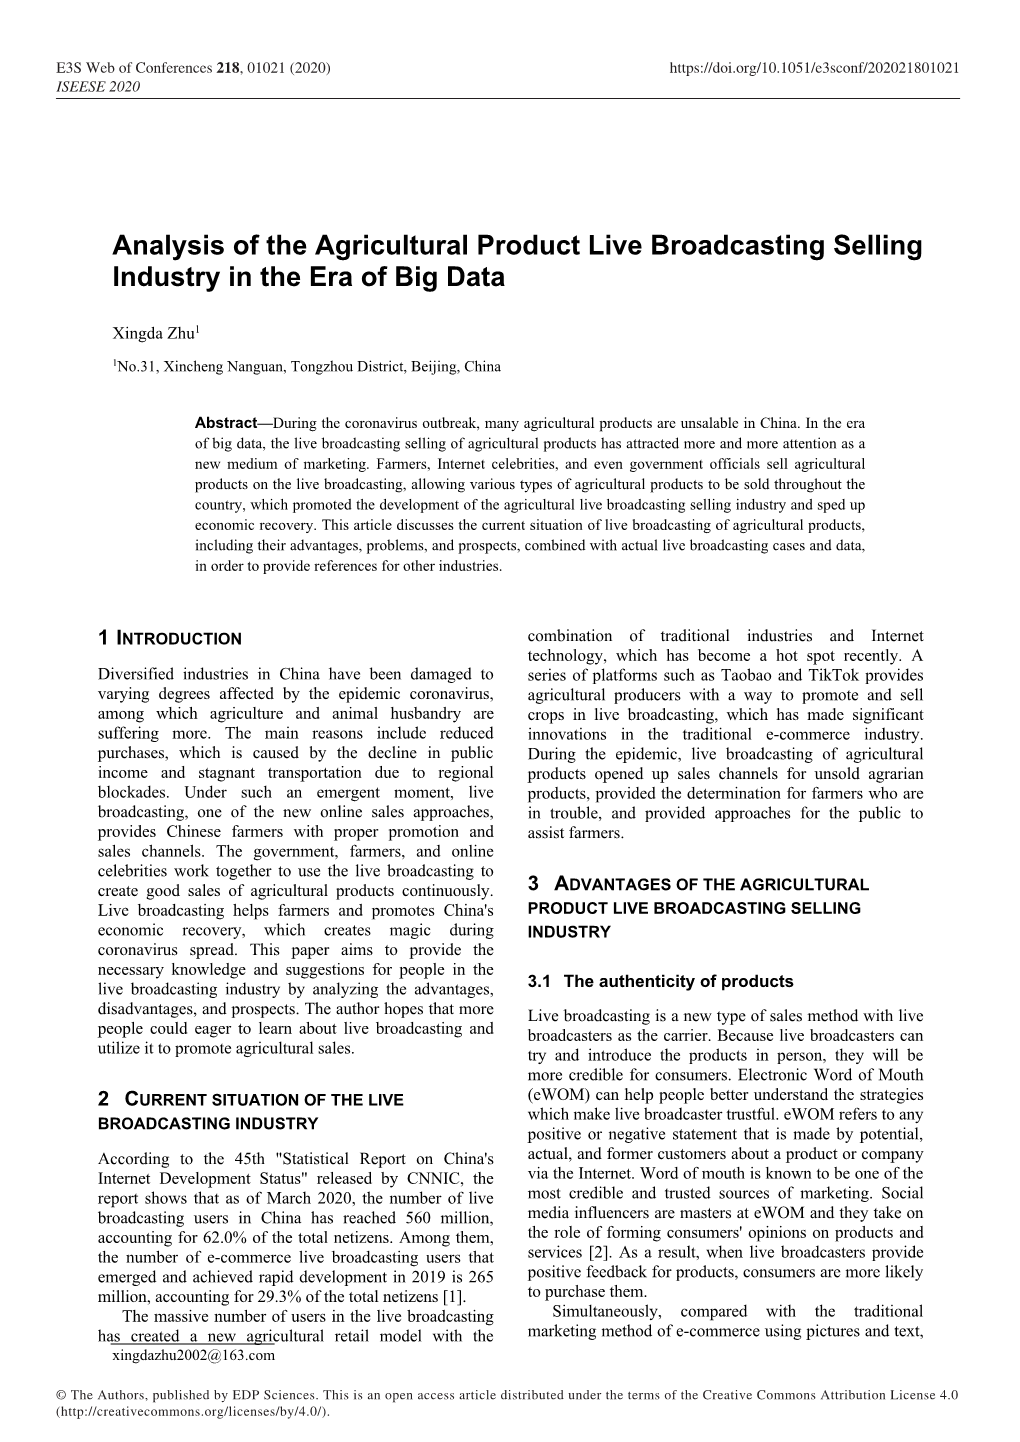 Analysis of the Agricultural Product Live Broadcasting Selling Industry in the Era of Big Data